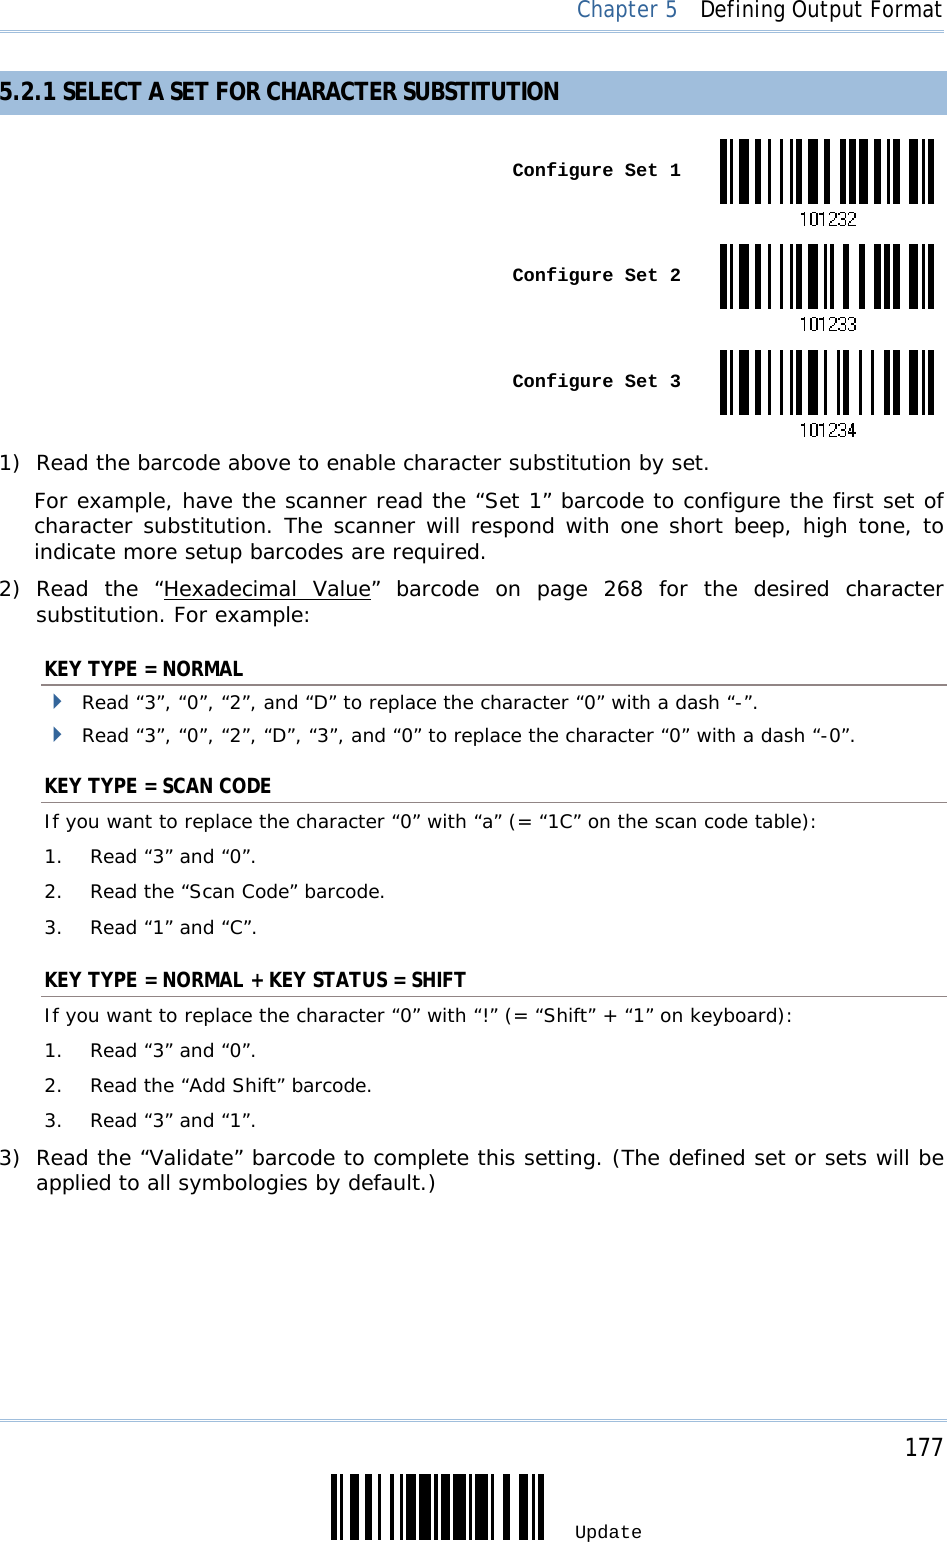     177 Update  Chapter 5  Defining Output Format 5.2.1 SELECT A SET FOR CHARACTER SUBSTITUTION  Configure Set 1 Configure Set 2 Configure Set 31) Read the barcode above to enable character substitution by set.  For example, have the scanner read the “Set 1” barcode to configure the first set of character substitution. The scanner will respond with one short beep, high tone, to indicate more setup barcodes are required. 2) Read the “Hexadecimal Value” barcode on page 268 for the desired character substitution. For example: KEY TYPE = NORMAL  Read “3”, “0”, “2”, and “D” to replace the character “0” with a dash “-”.  Read “3”, “0”, “2”, “D”, “3”, and “0” to replace the character “0” with a dash “-0”. KEY TYPE = SCAN CODE If you want to replace the character “0” with “a” (= “1C” on the scan code table): 1.  Read “3” and “0”. 2.  Read the “Scan Code” barcode. 3.  Read “1” and “C”. KEY TYPE = NORMAL + KEY STATUS = SHIFT If you want to replace the character “0” with “!” (= “Shift” + “1” on keyboard): 1.  Read “3” and “0”. 2.  Read the “Add Shift” barcode. 3.  Read “3” and “1”. 3) Read the “Validate” barcode to complete this setting. (The defined set or sets will be applied to all symbologies by default.) 